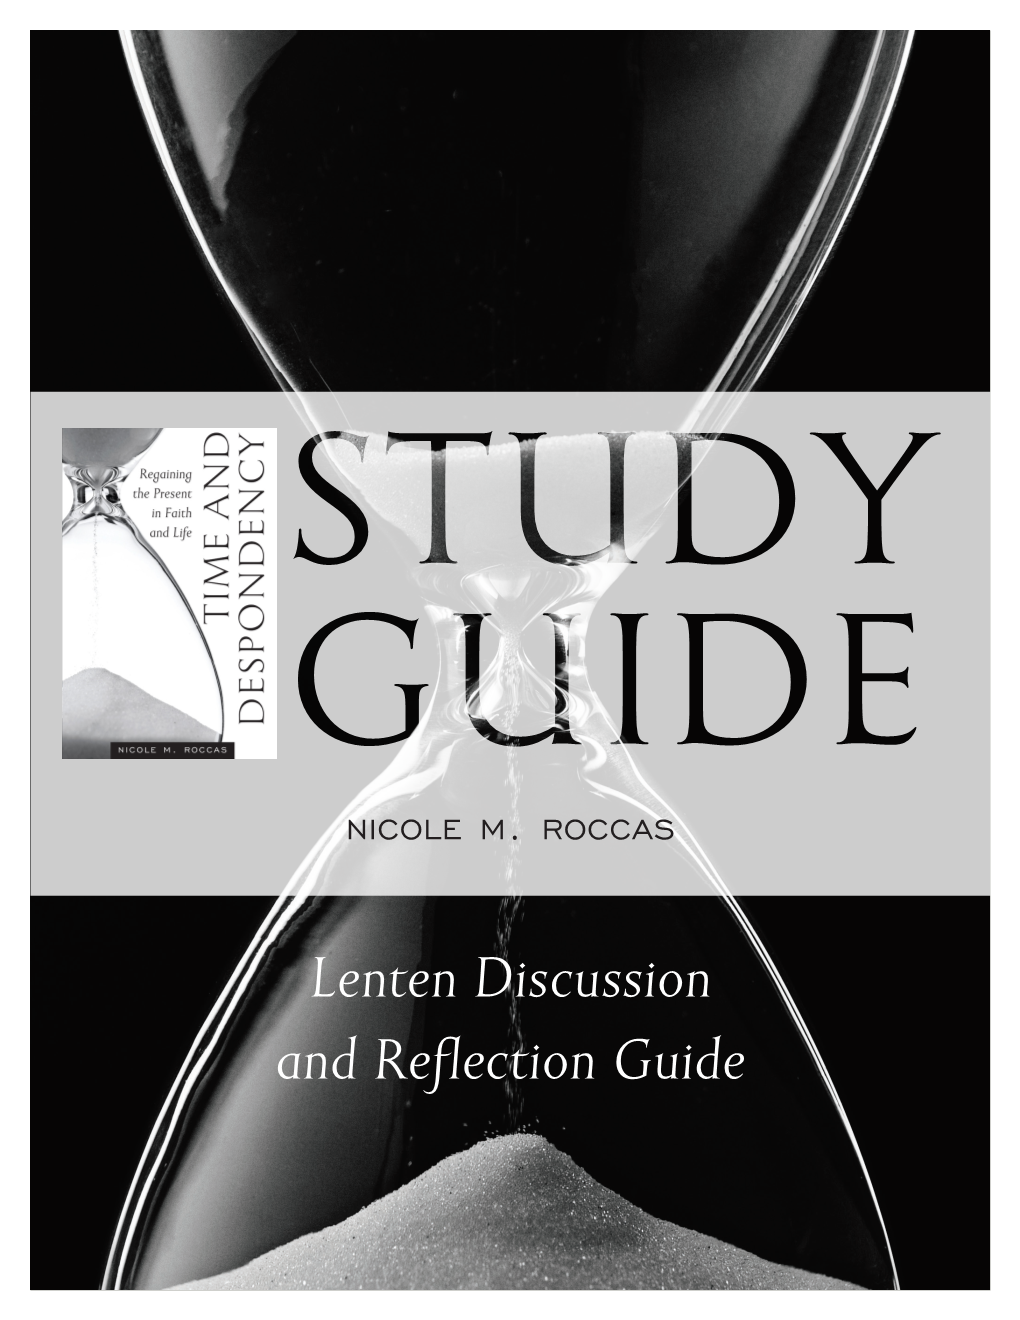 Lenten Discussion and Reflection Guide Introduction